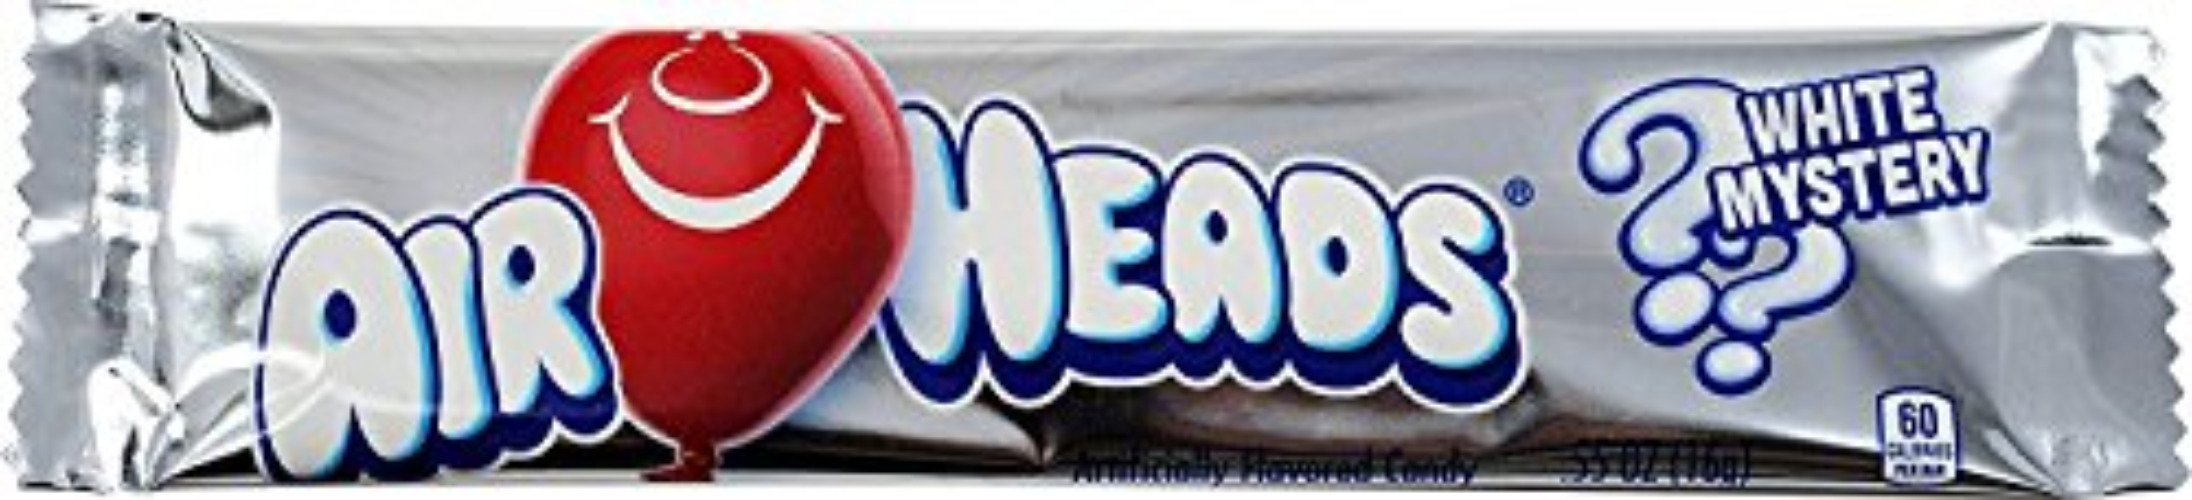 White Mystery Airheads (for Snack Redeem)